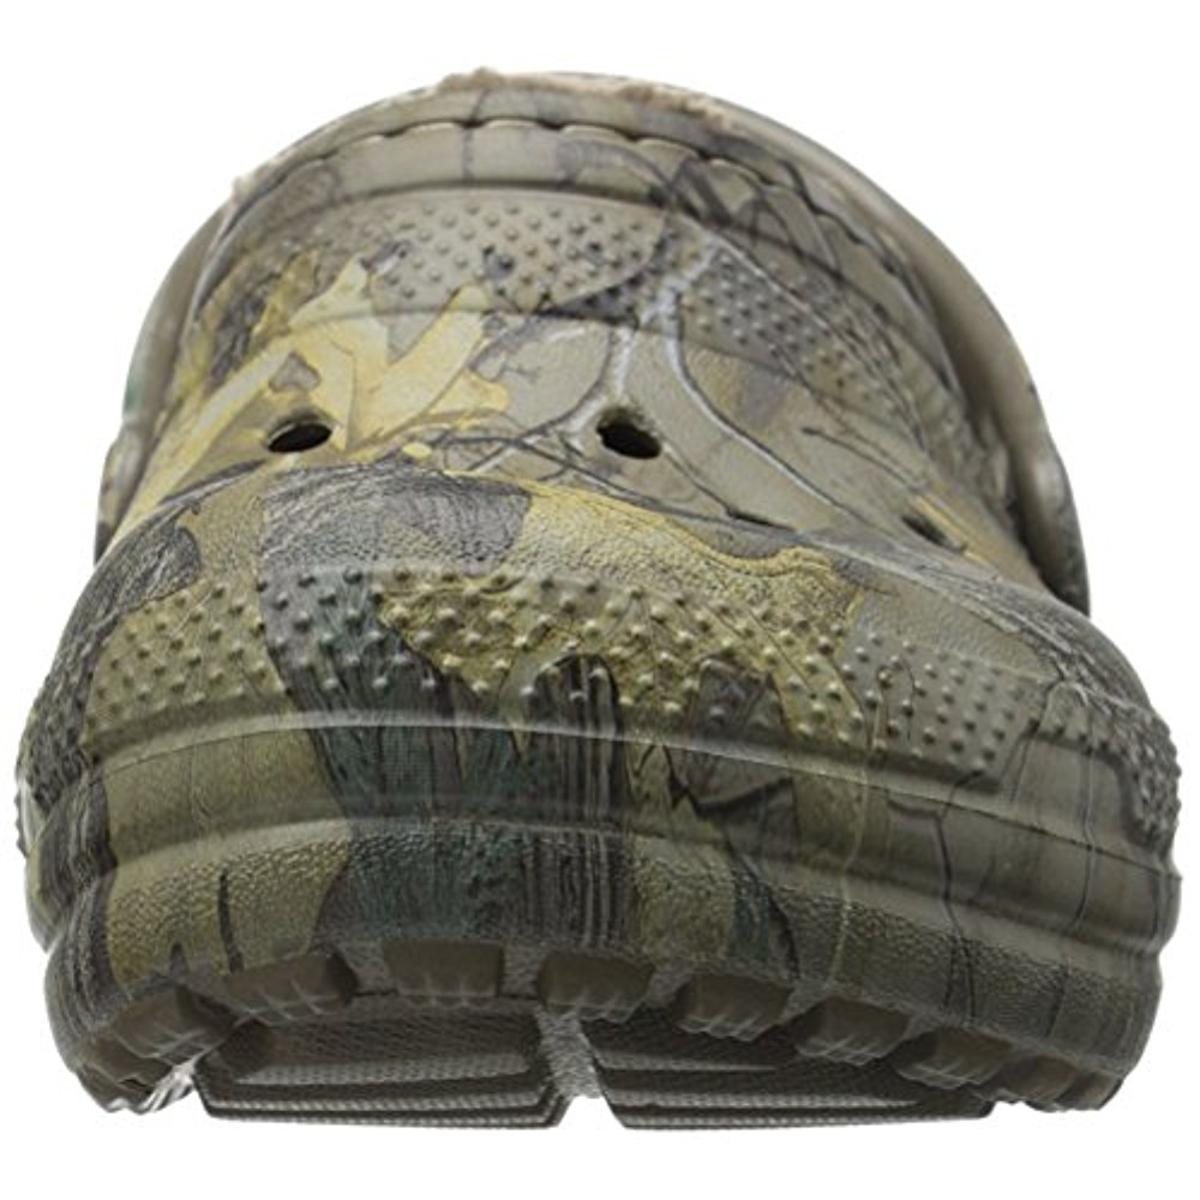 Crocs 0612 Boys Classic Realtree Xtra Lined Camouflage Clogs Shoes BHFO ...